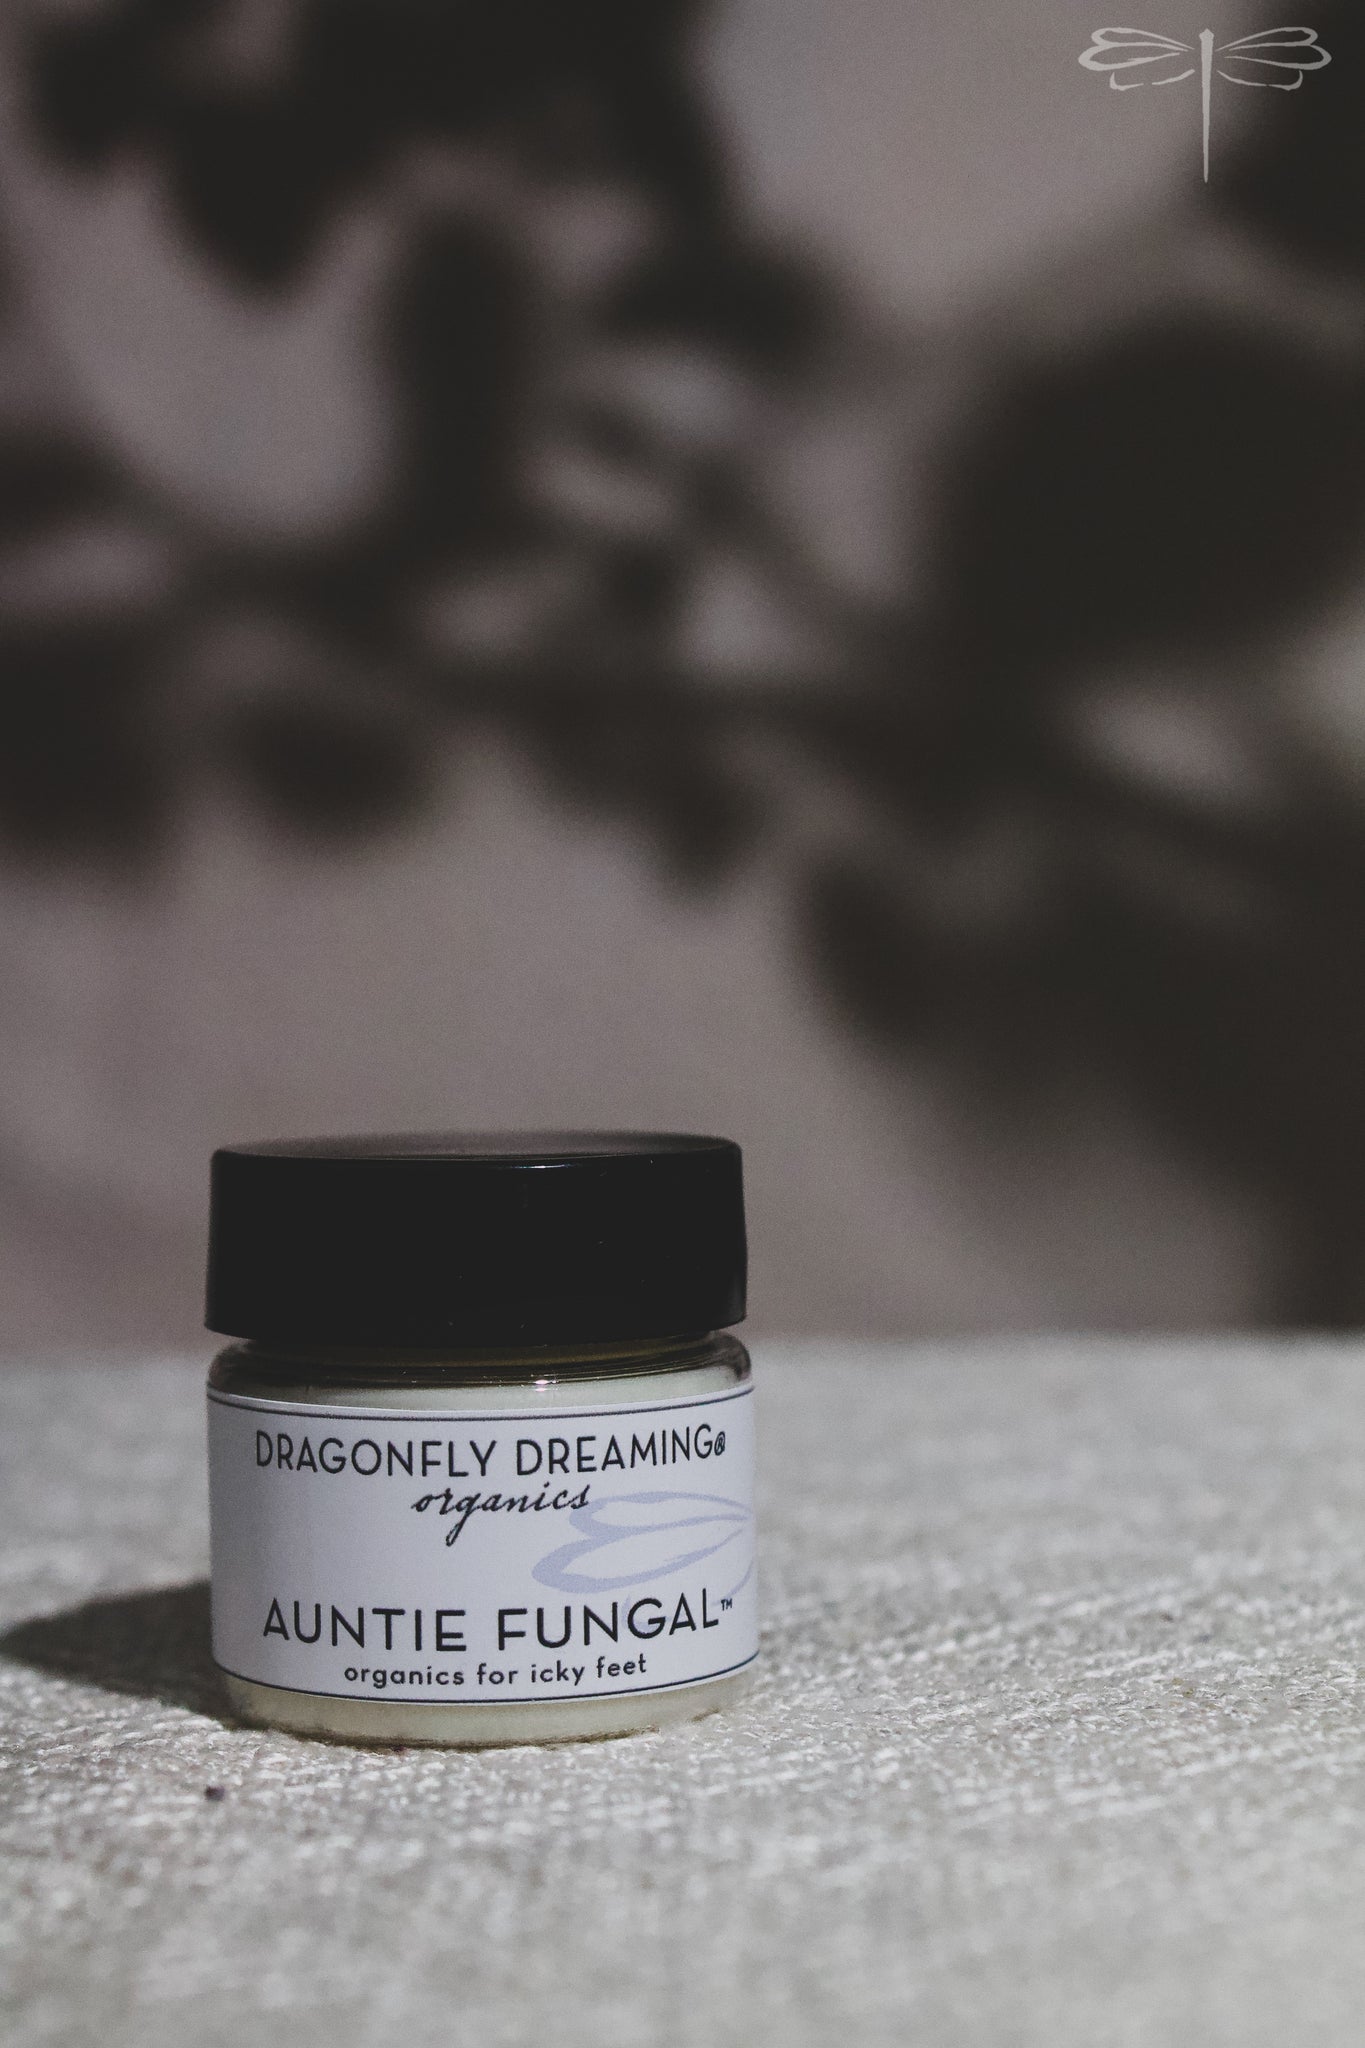 Pictured here, Auntie Fungal Organic Treatment by Dragonfly Dreaming Organics